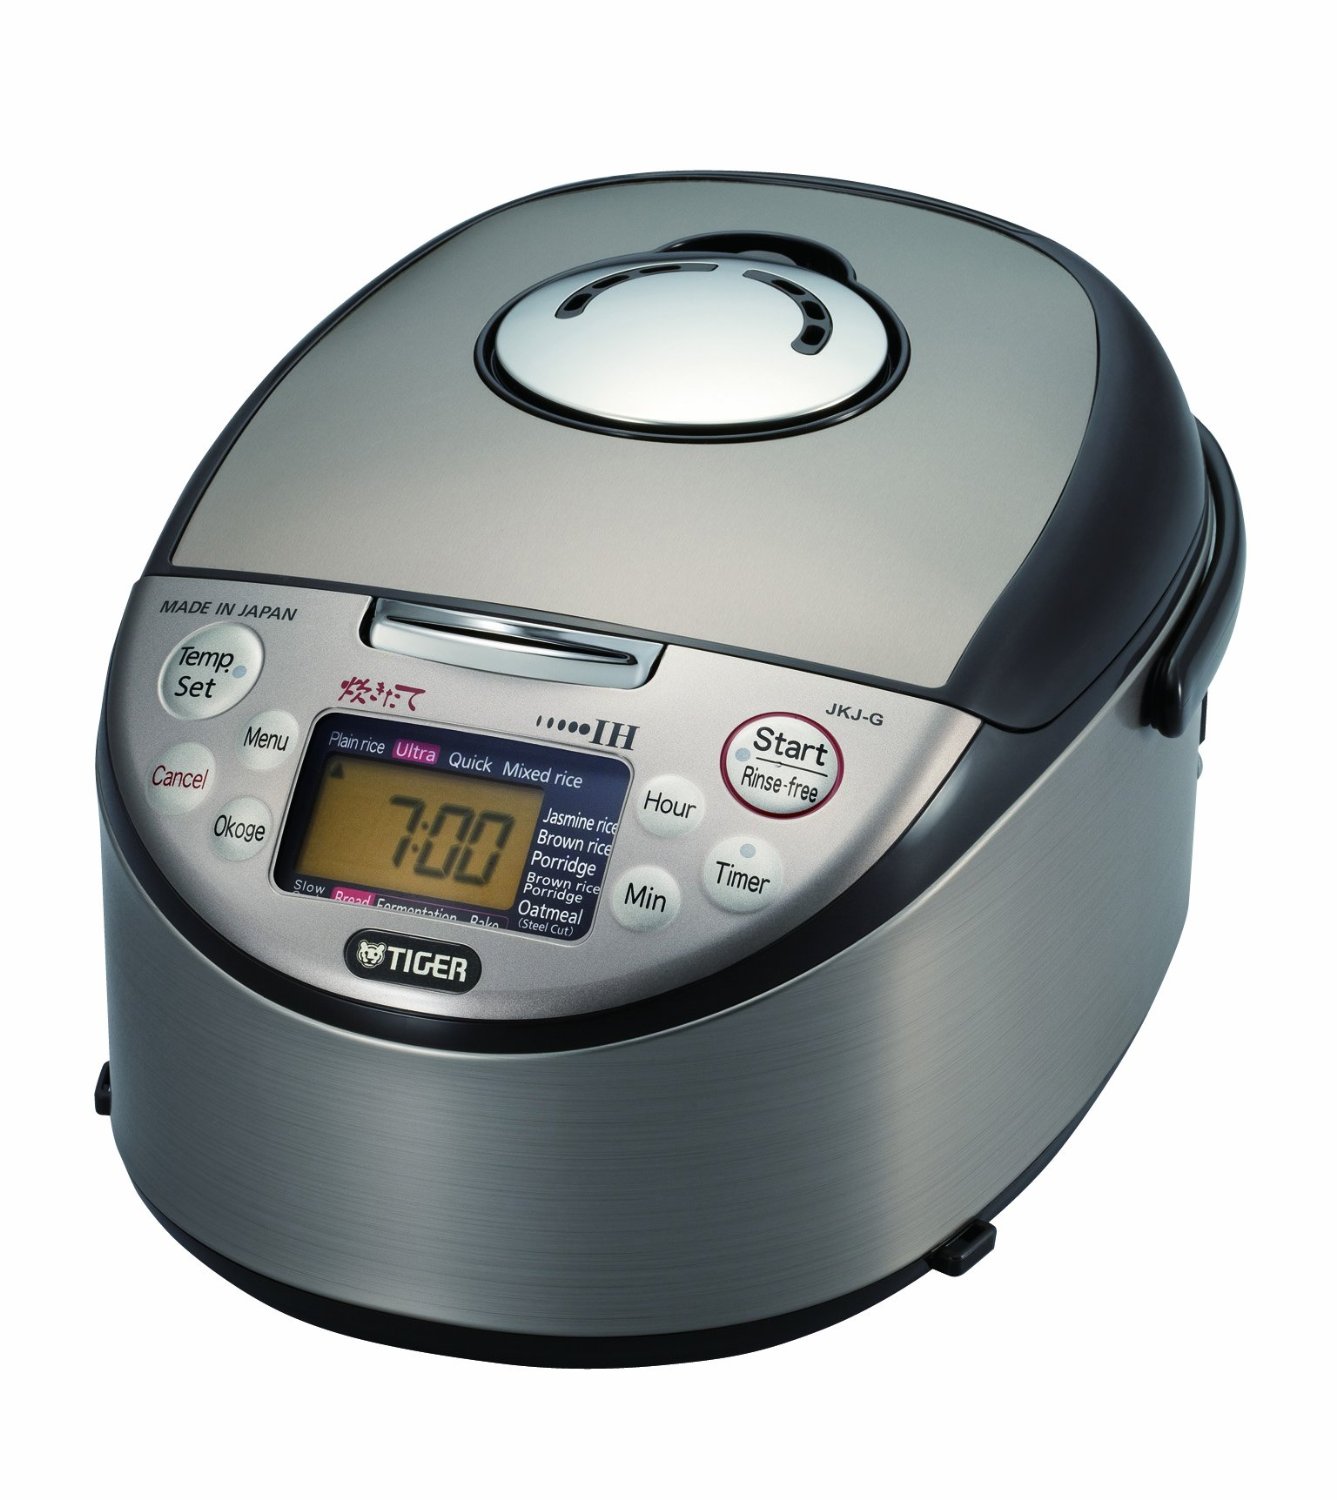 Tiger JKH-G10U Rice Cooker and Warmer Review